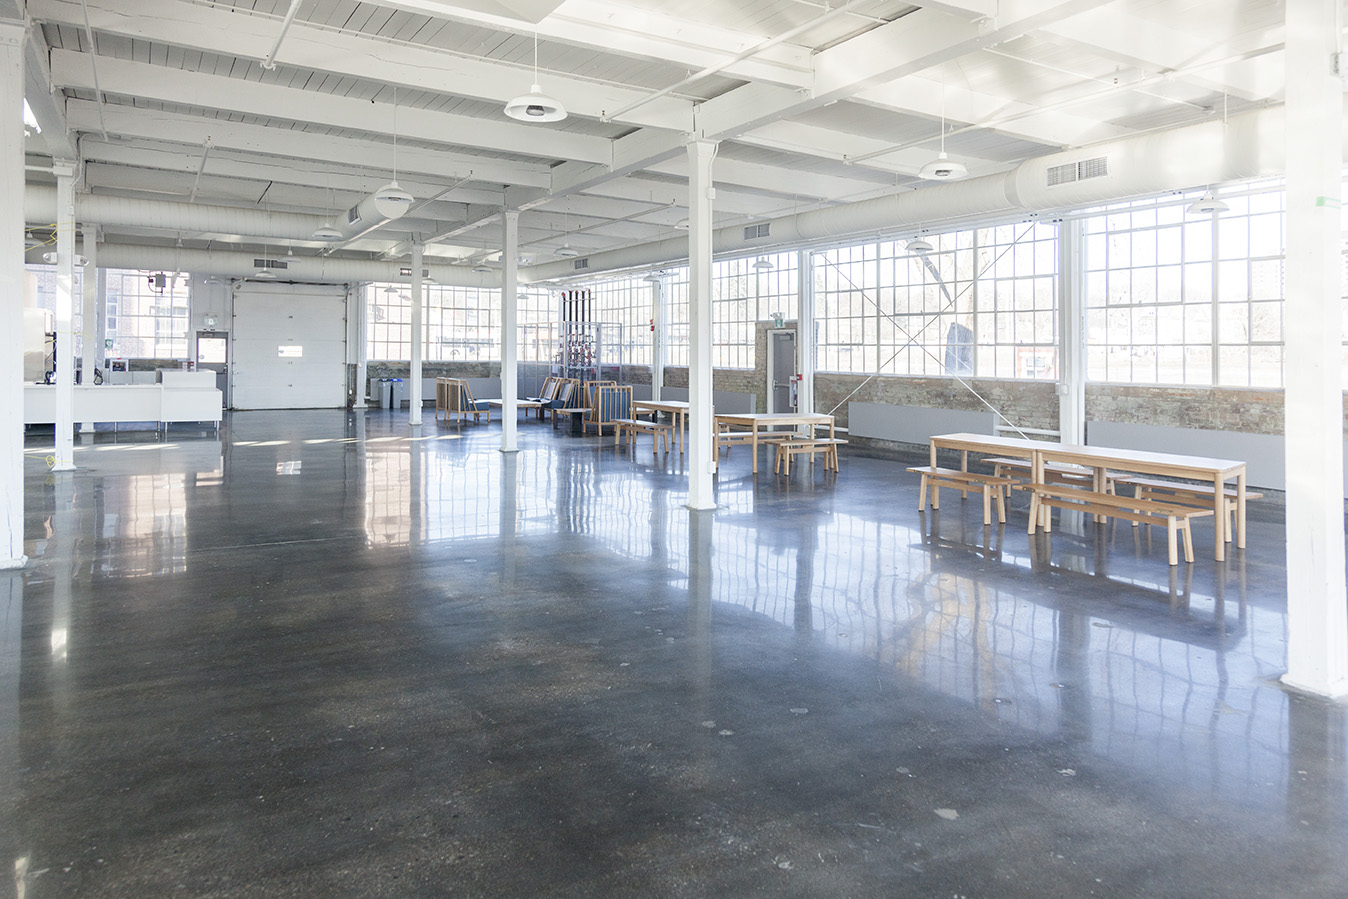 Brightly lit industrial space with rows of tables and chairs along one wall. CAPTION